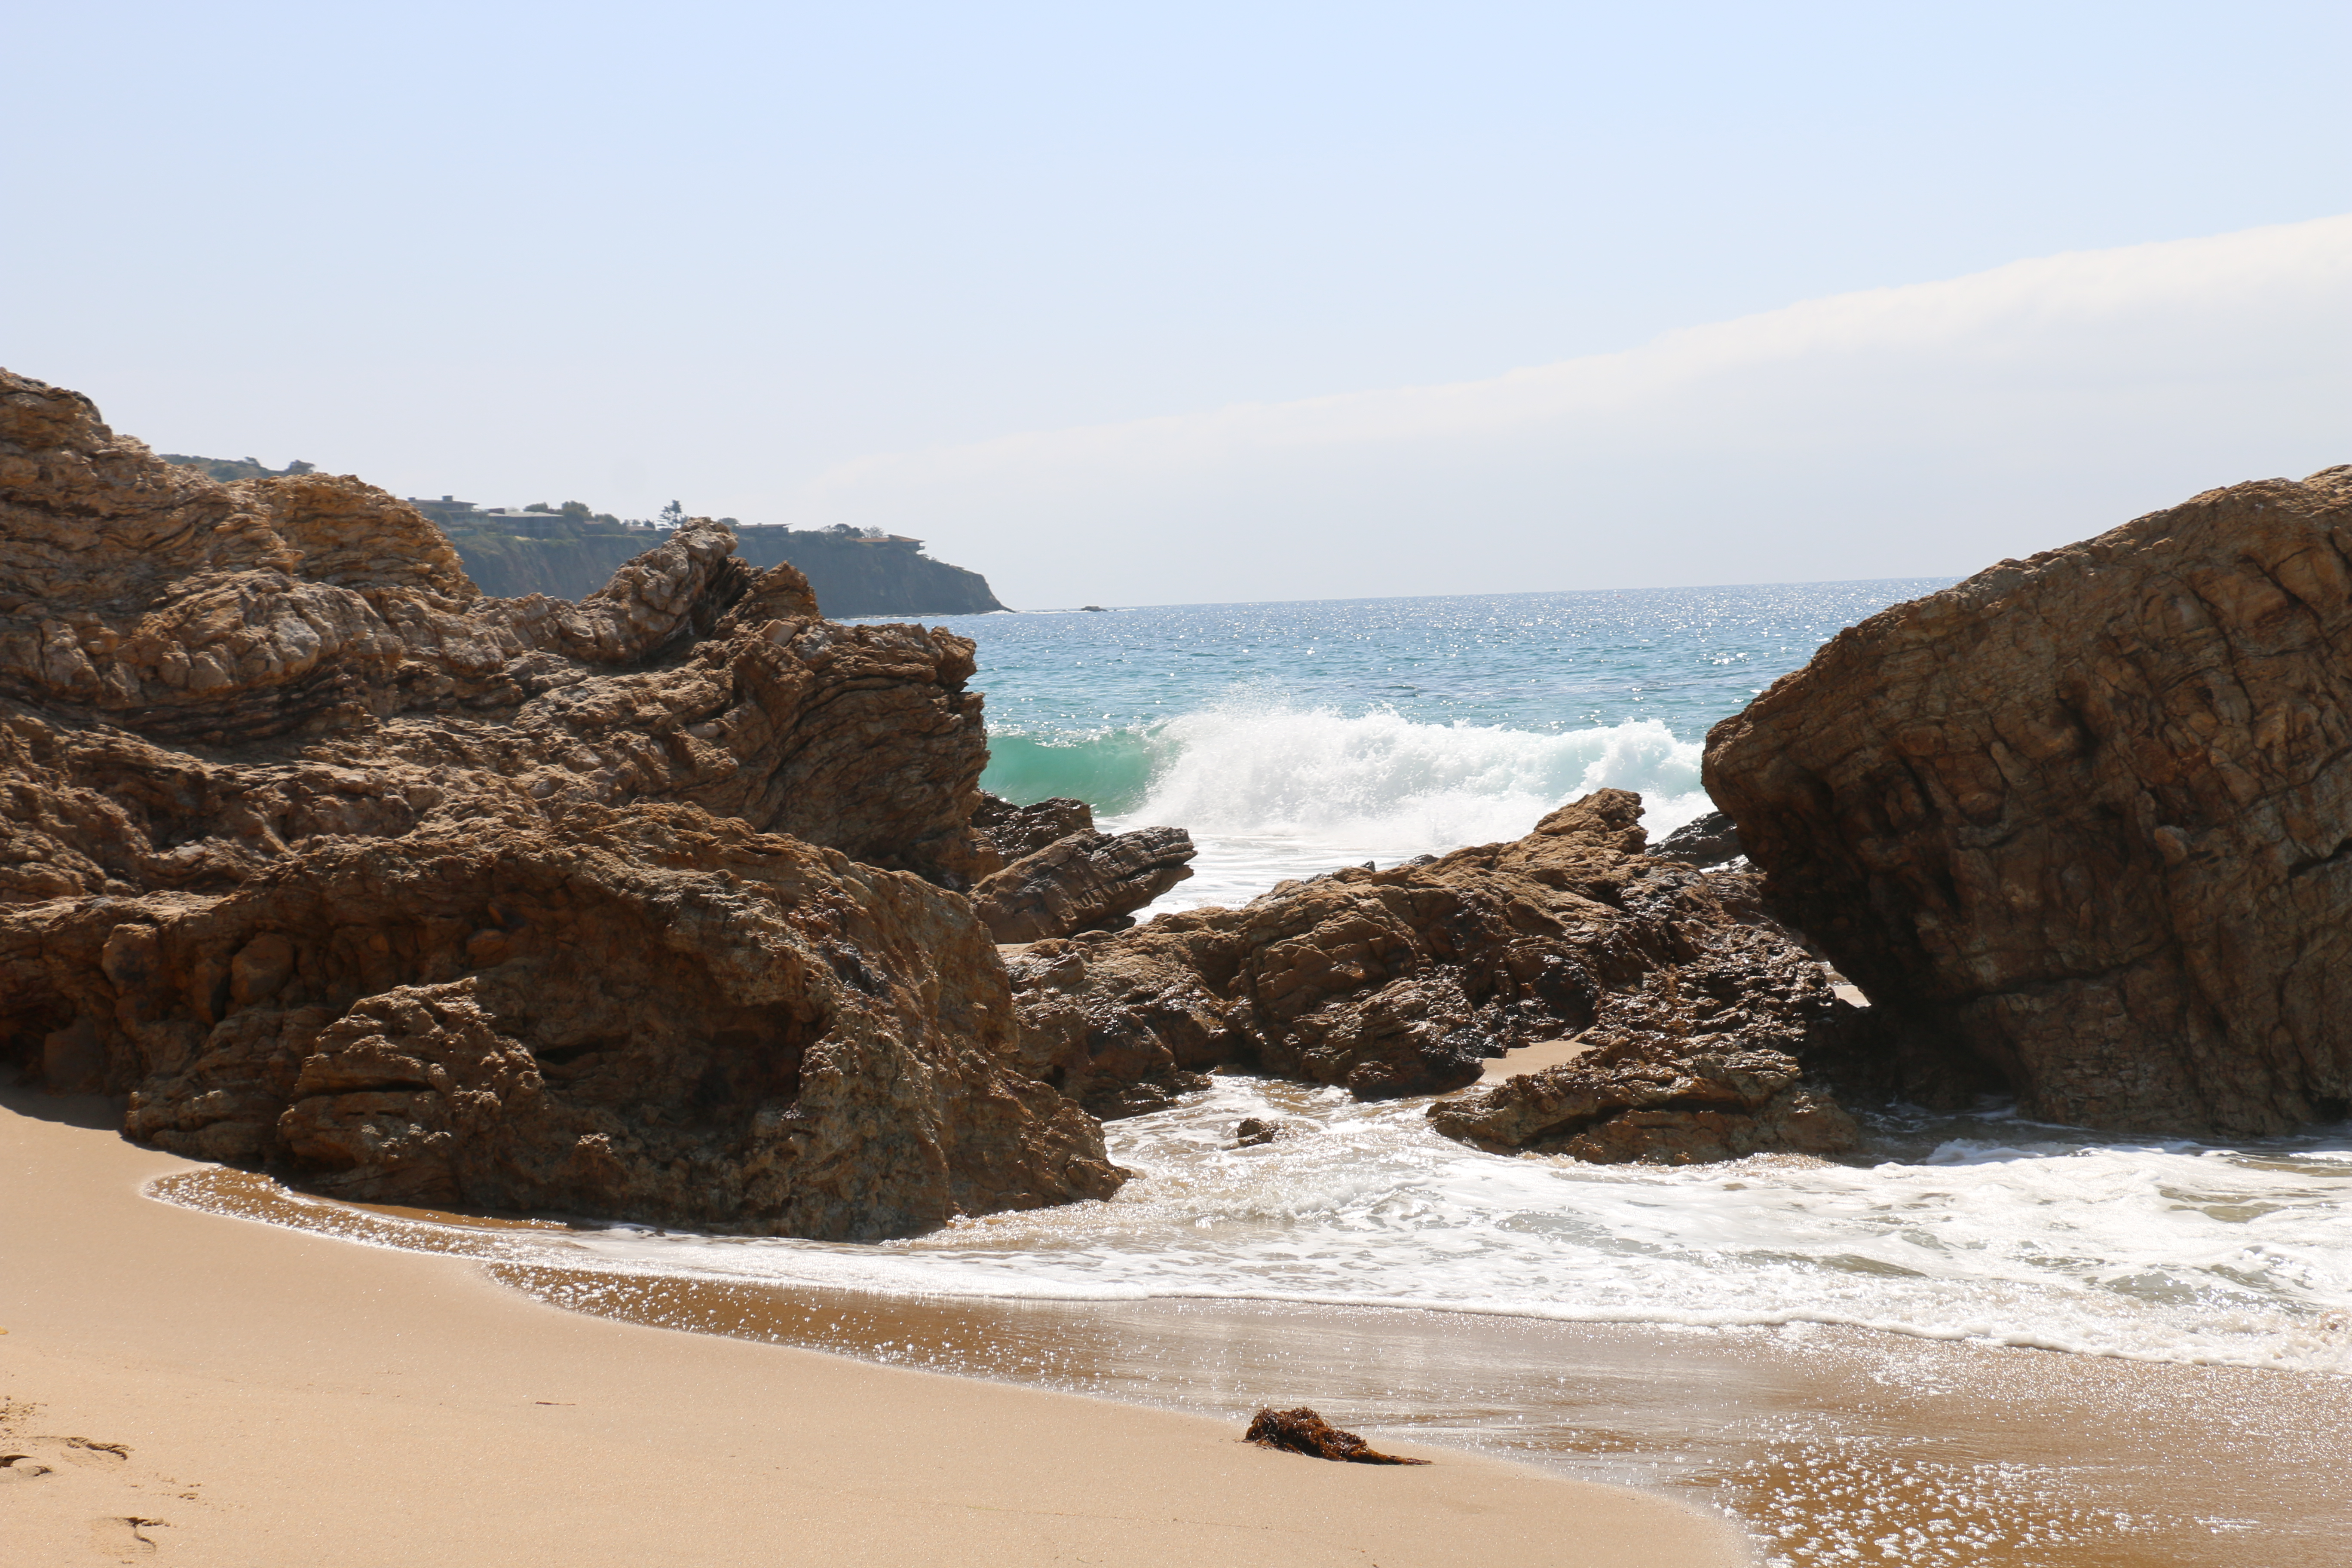 Day 30 – Crystal Cove Again